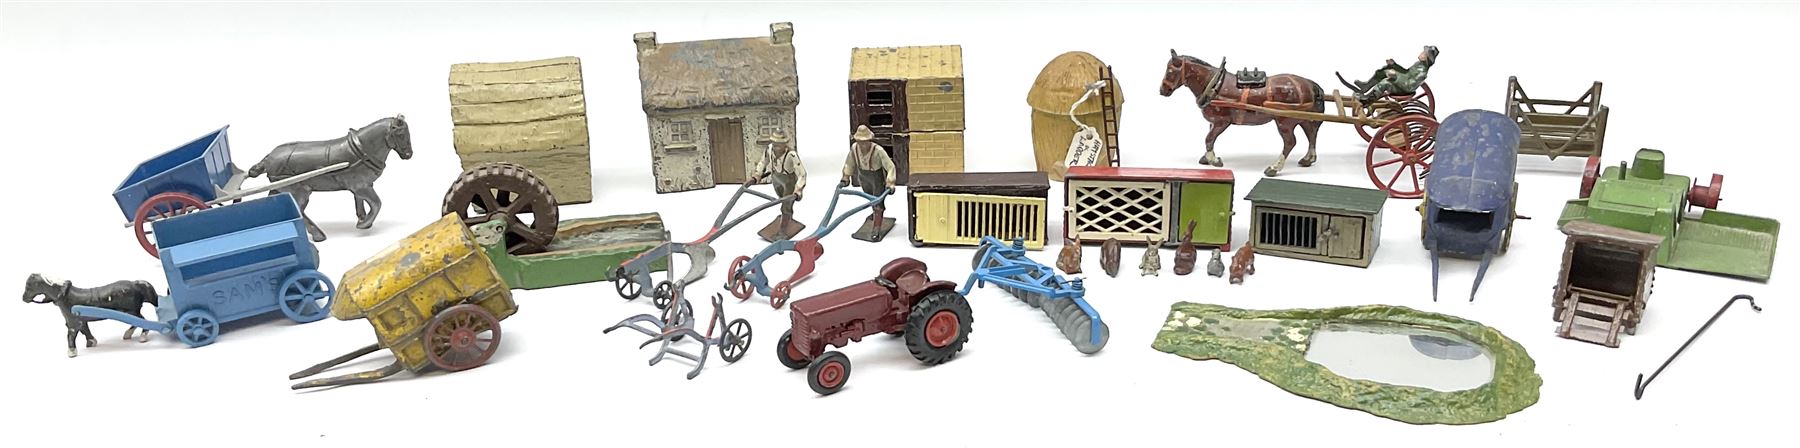 Lead figures and die-cast farm accessories including F.G. Taylor thatched cottage and rabbit hutch w